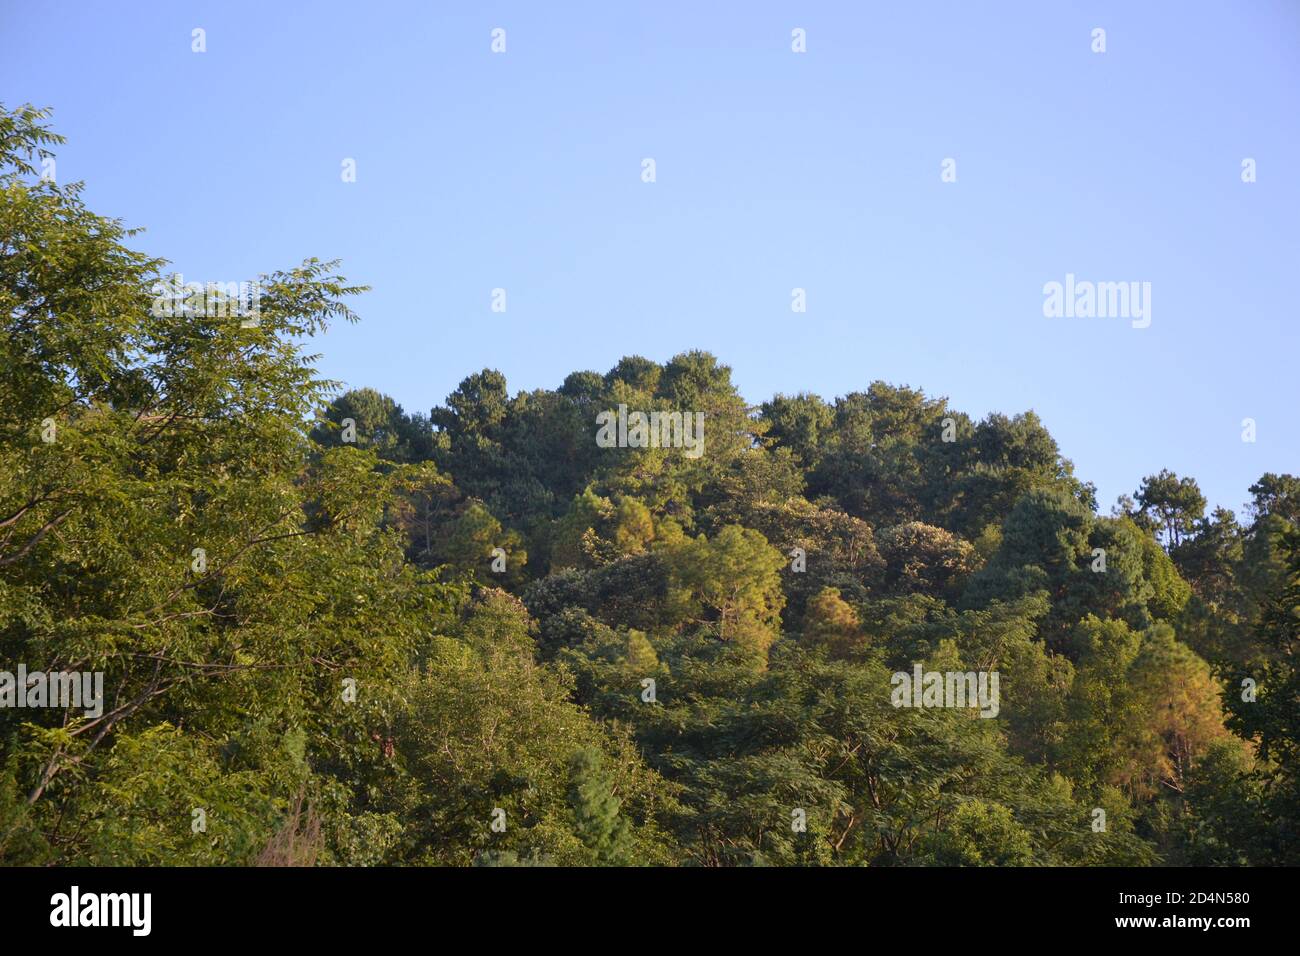 Nature at its best. clouds, trees, hills, forest, greenary, blue sky and much more. Stock Photo